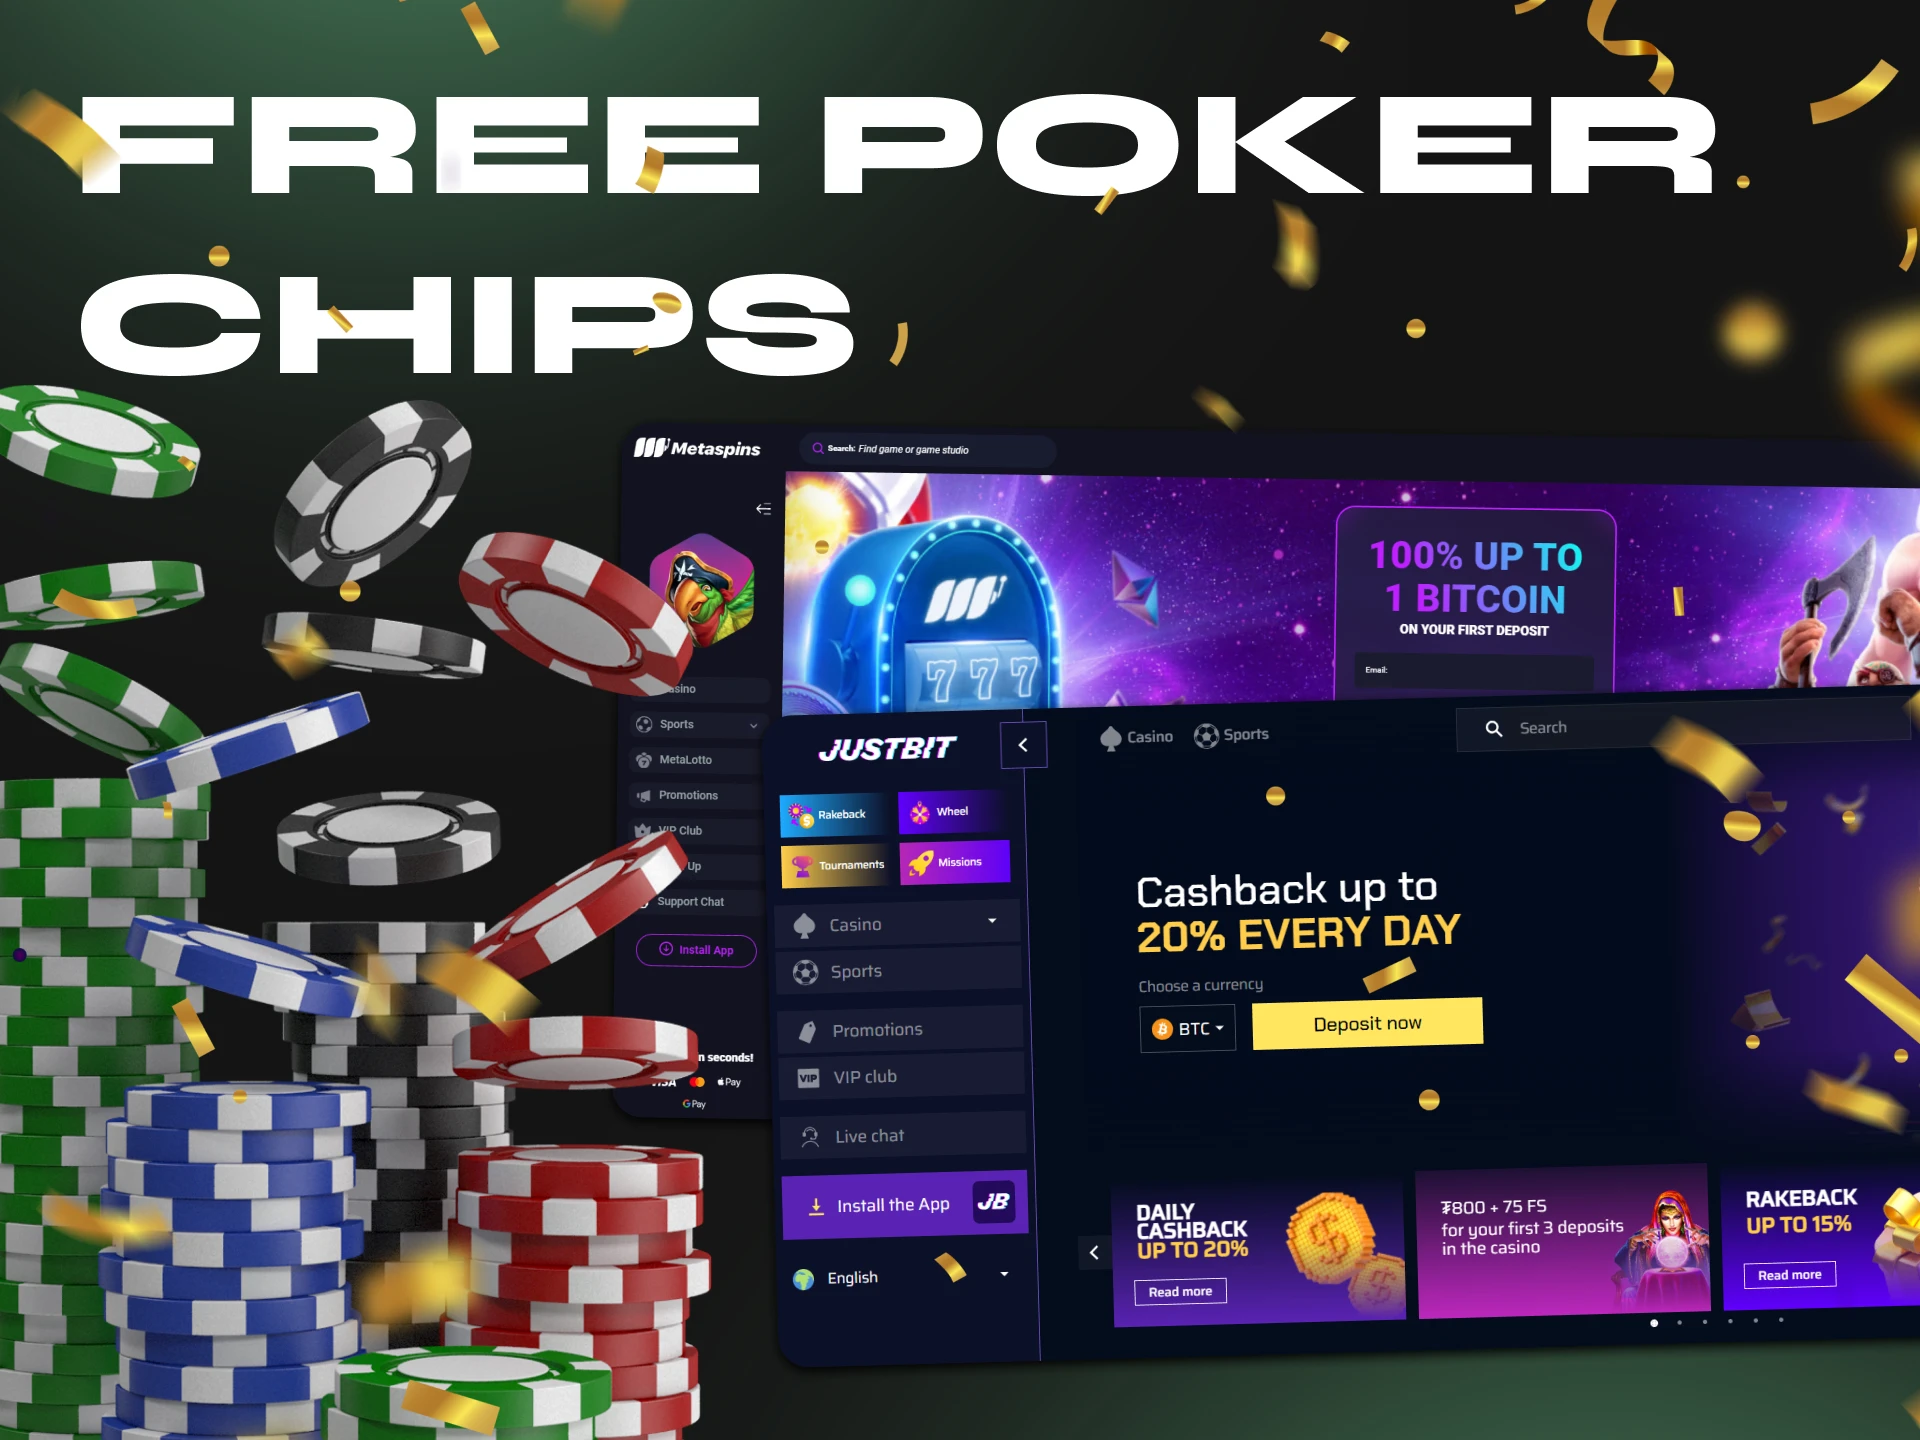 Get a bonus of free poker chips at these crypto casinos.